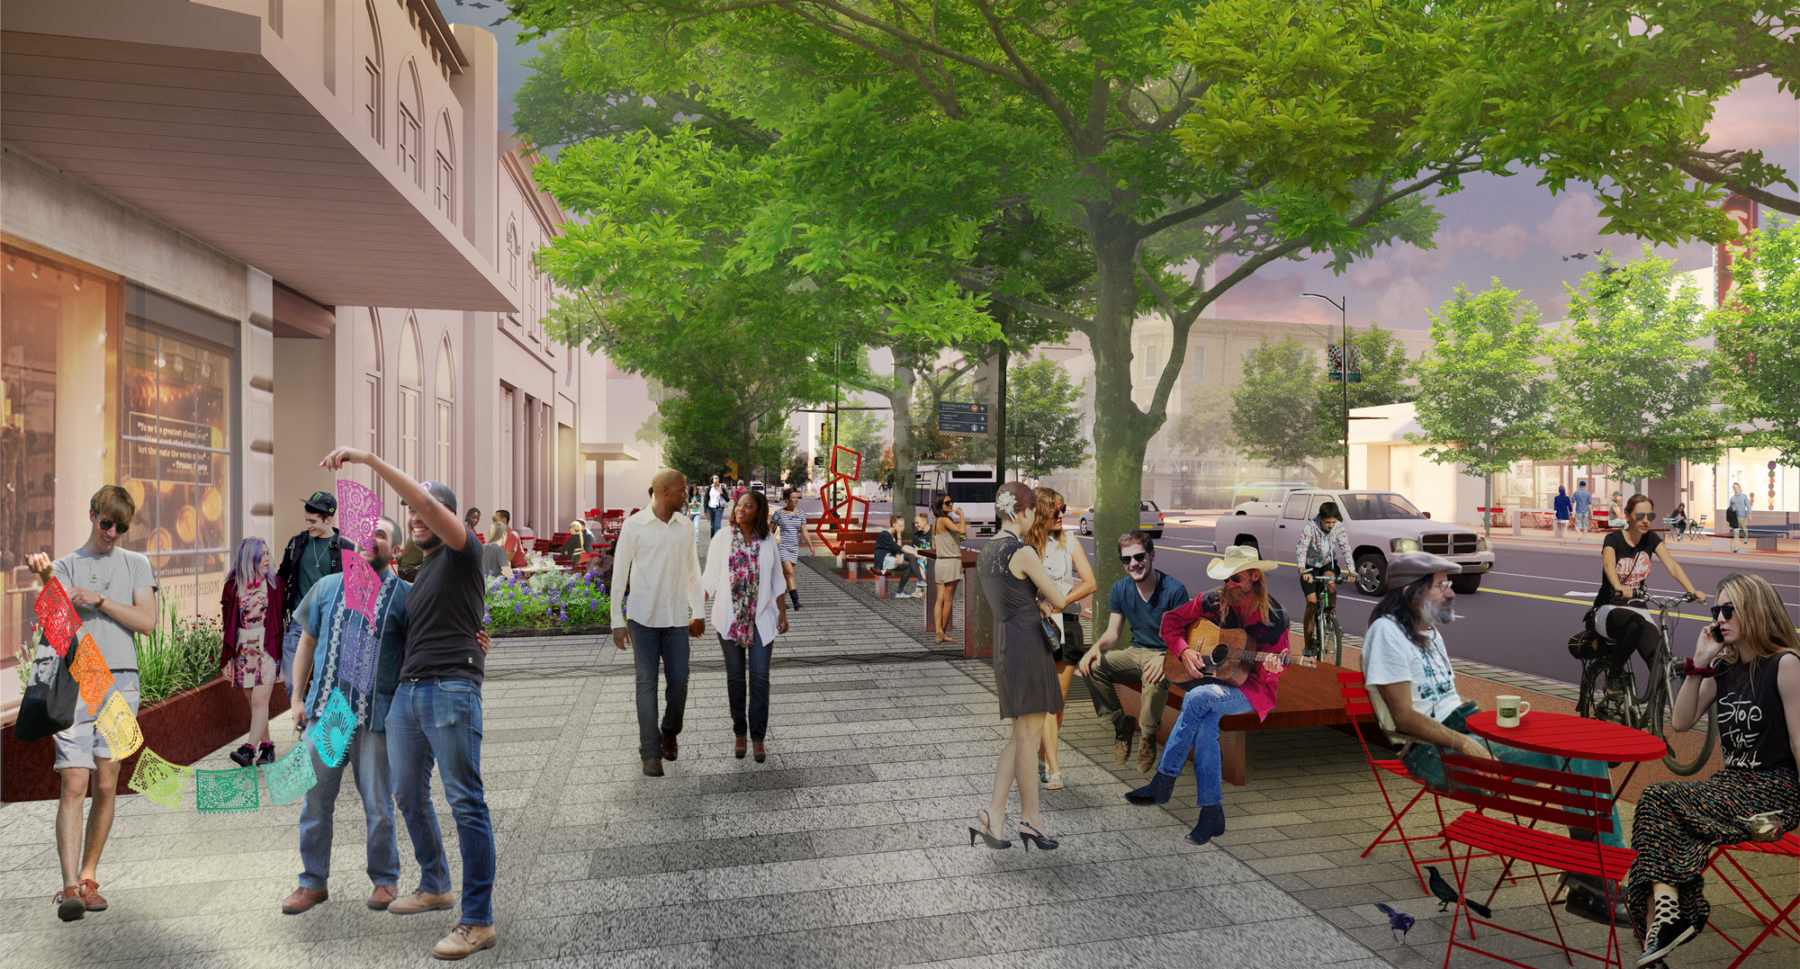 Rendering of proposed street design intervention. On the right people sit at red cafe tables. On the left a group holds a rainbow banner.